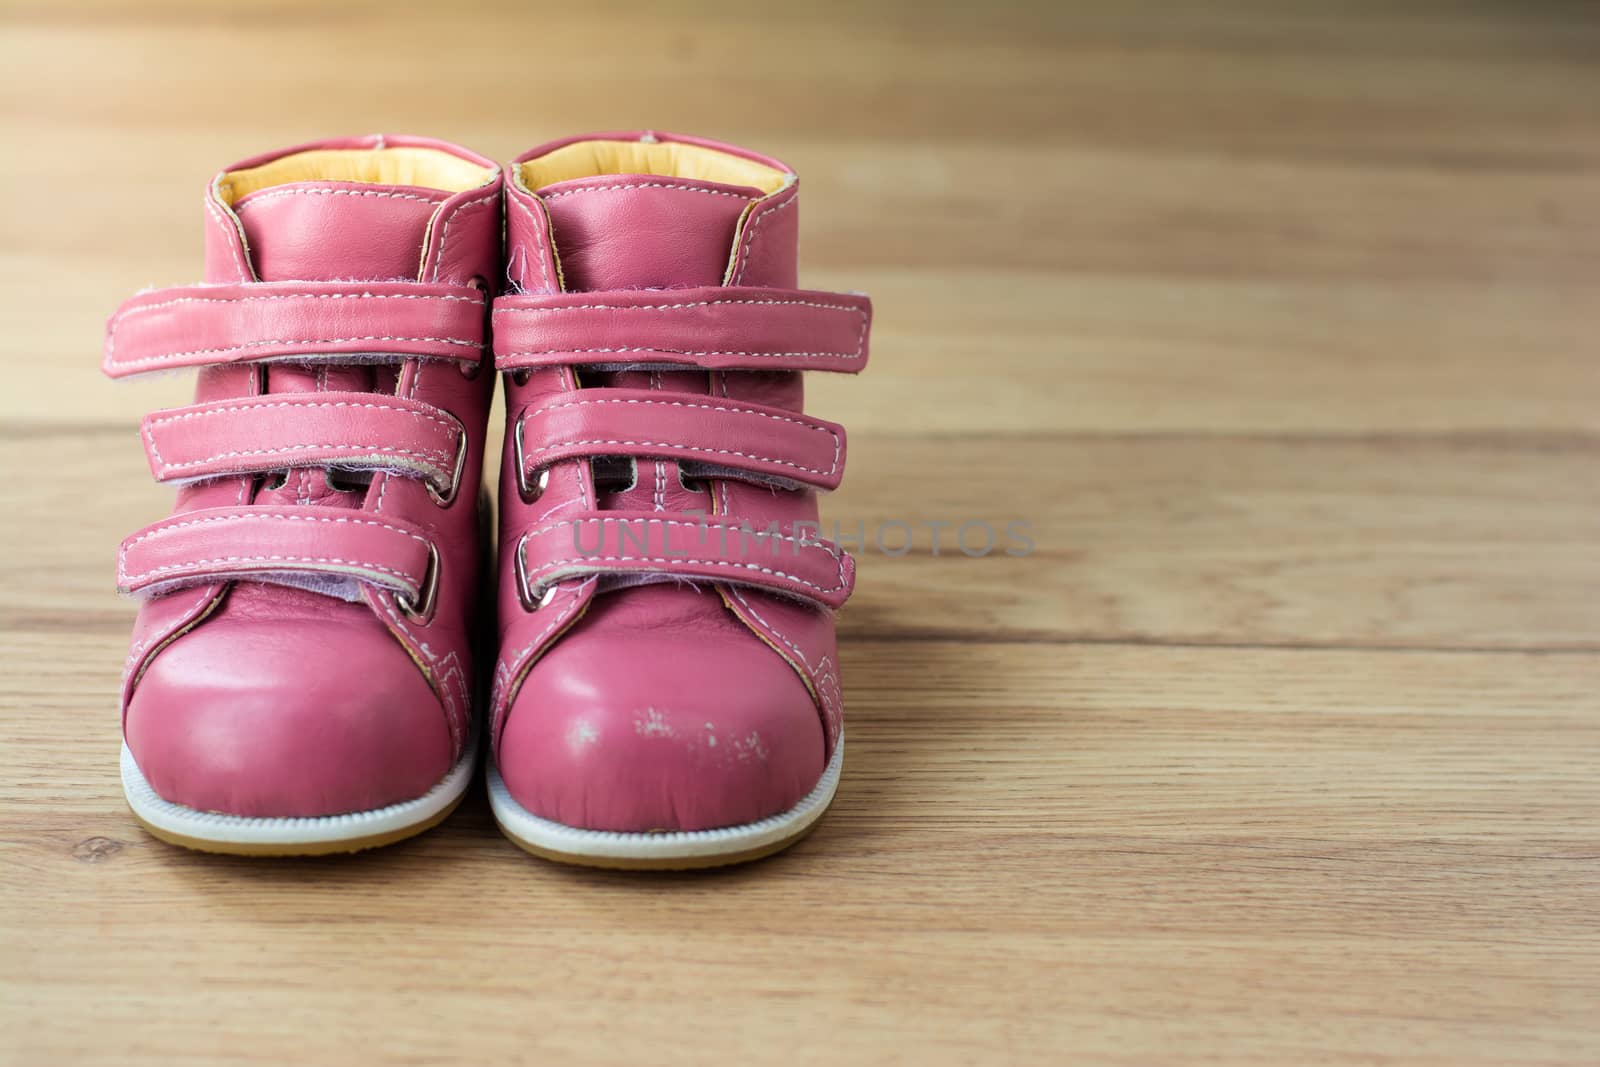 Pink Kids Shoes on wood background,Children's leather boots by jateshutter